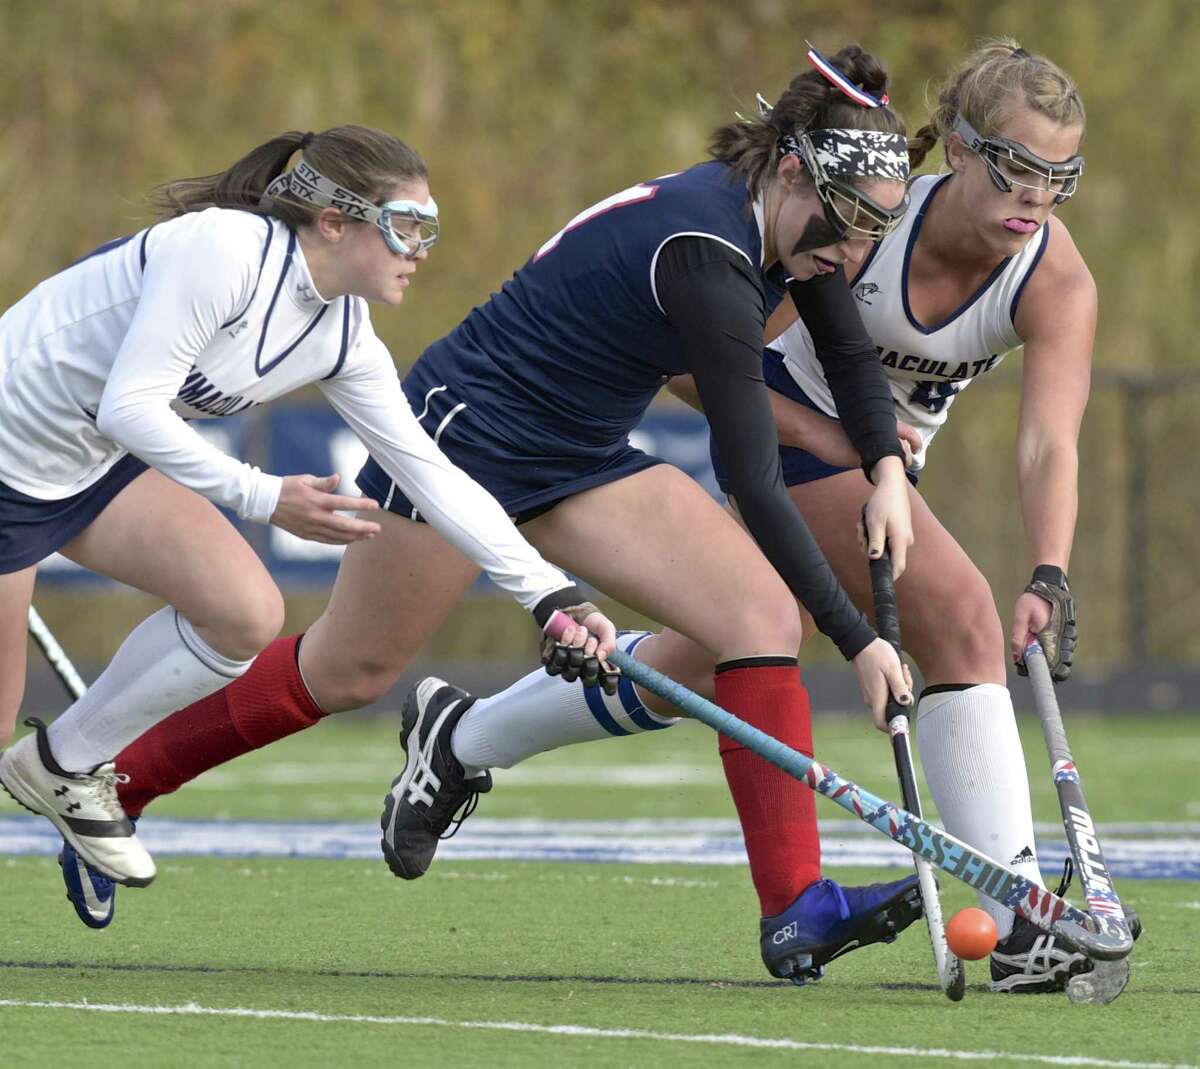 New Fairfield's Reagan Tenaglia (11) and Immaculate's Alexis Garden (17) and Madison Halas (14) fight for the ball in the girls State Class S Field Hockey playoff game between New Fairfield and Immaculate high schools, on Thursday afternoon, November 9, 2017, at Immaculate High School, in Danbury, Conn.